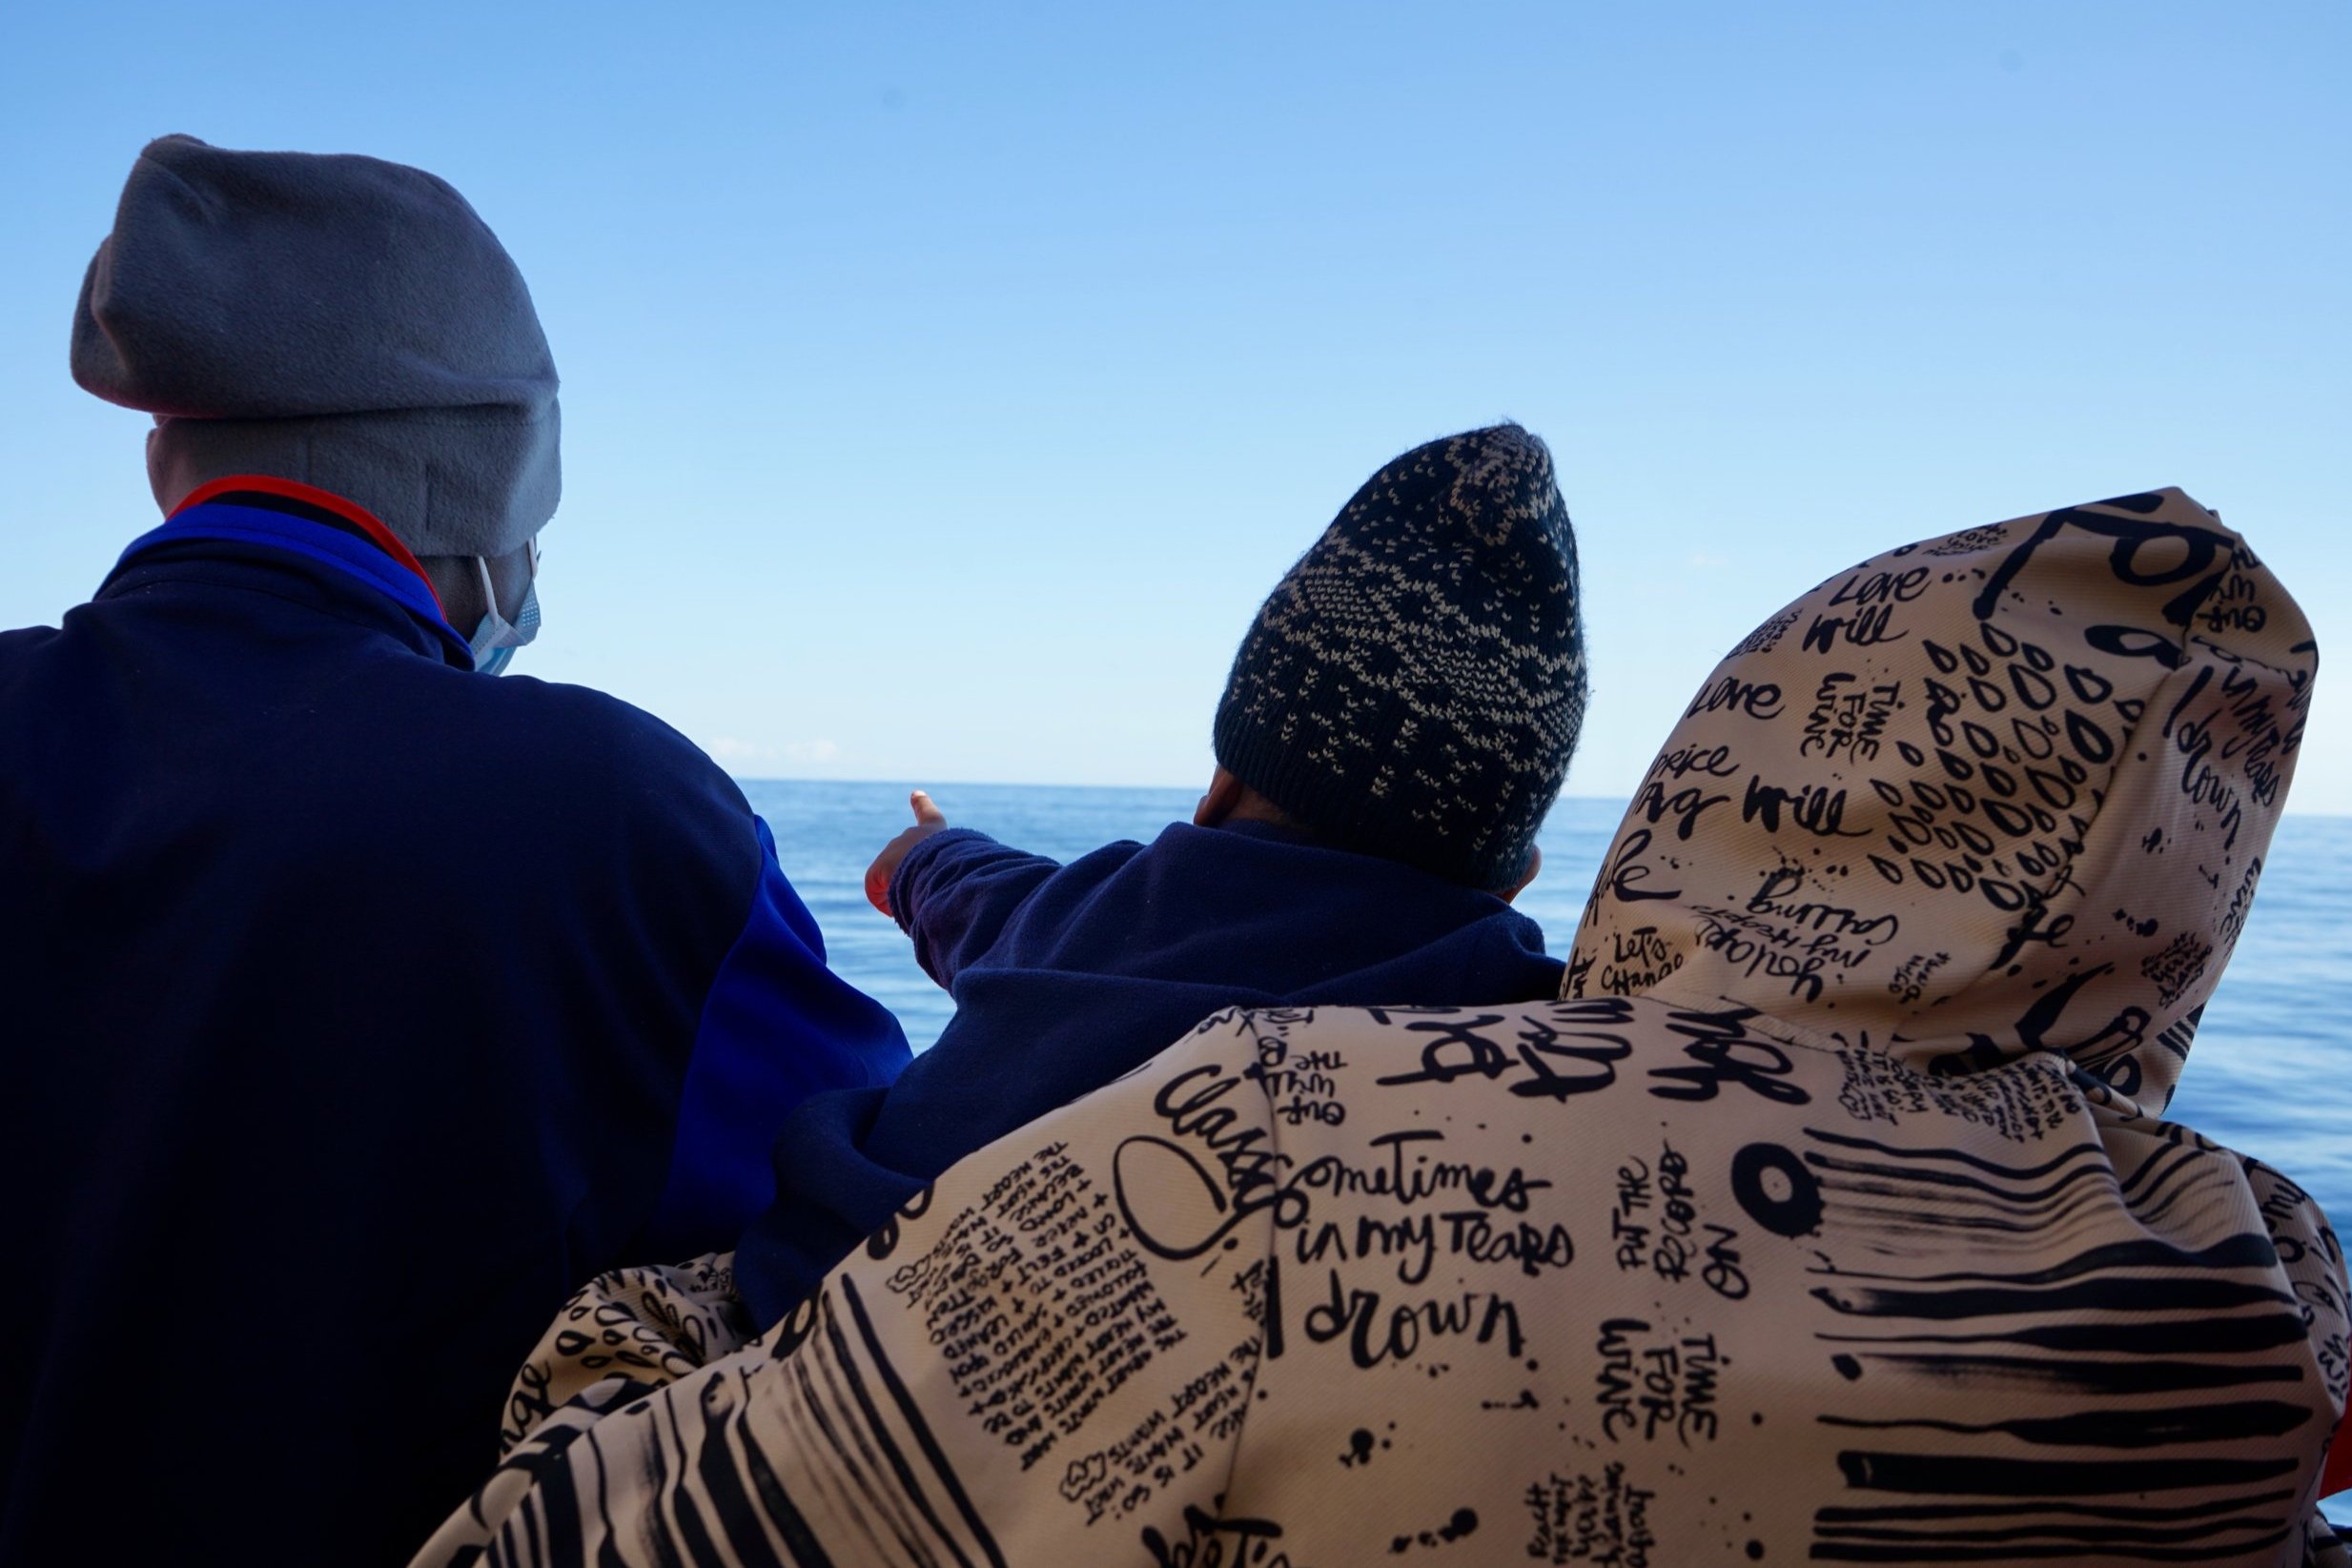 Survivors on board Ocean Viking looking out on the horizon.